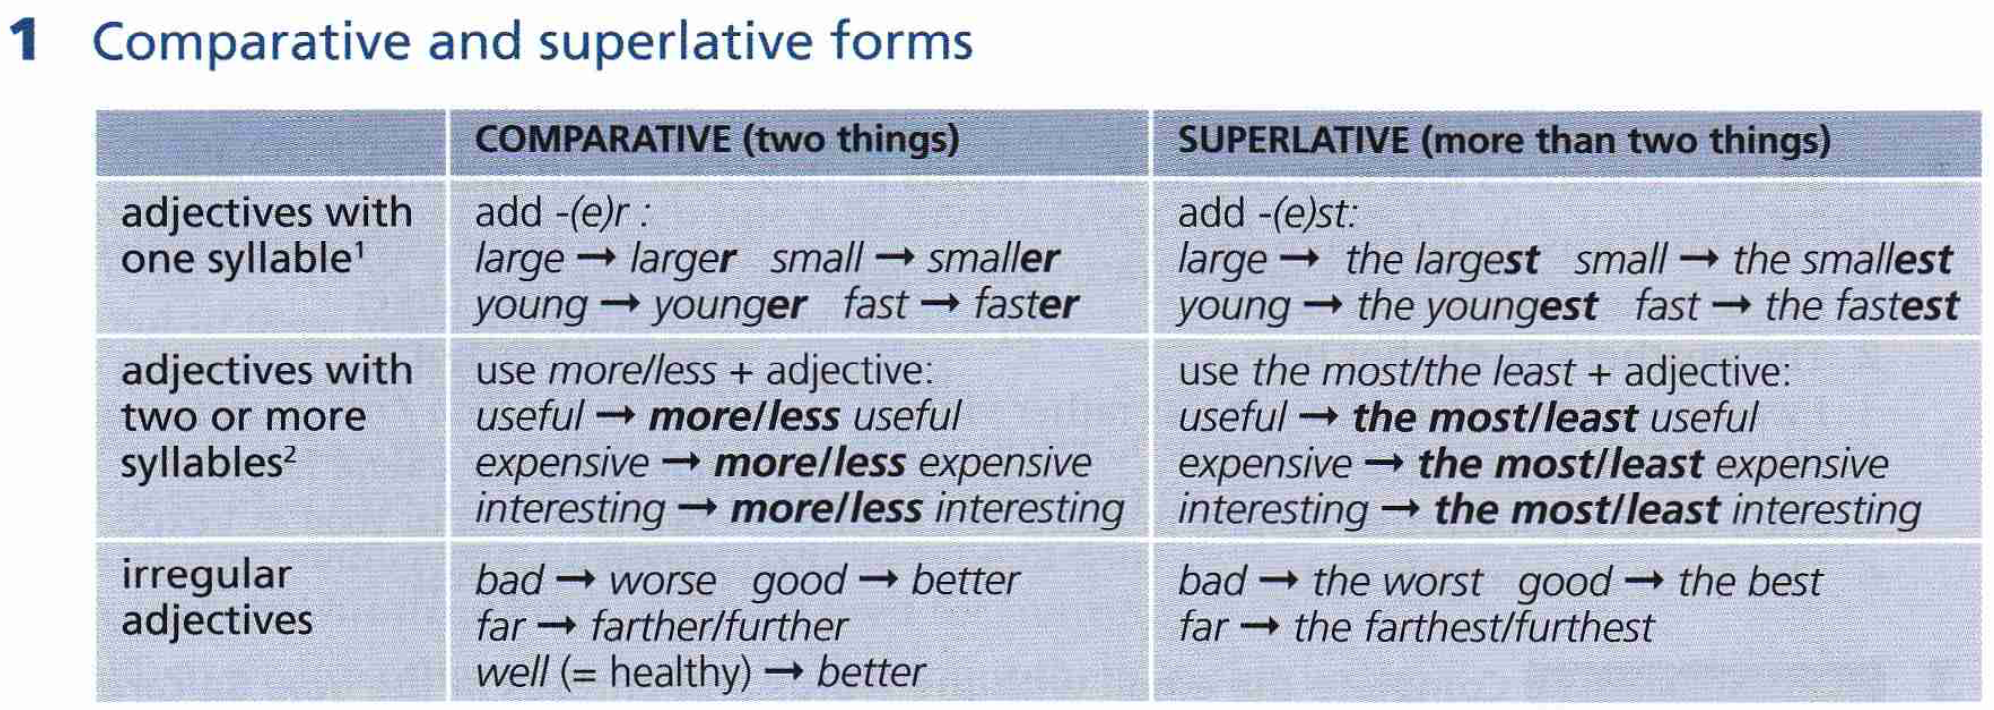 Little comparative form. Comparatives and Superlatives правило. Таблица Comparative and Superlative. Comparative and Superlative adjectives правило. Degrees of Comparison of adjectives таблица.